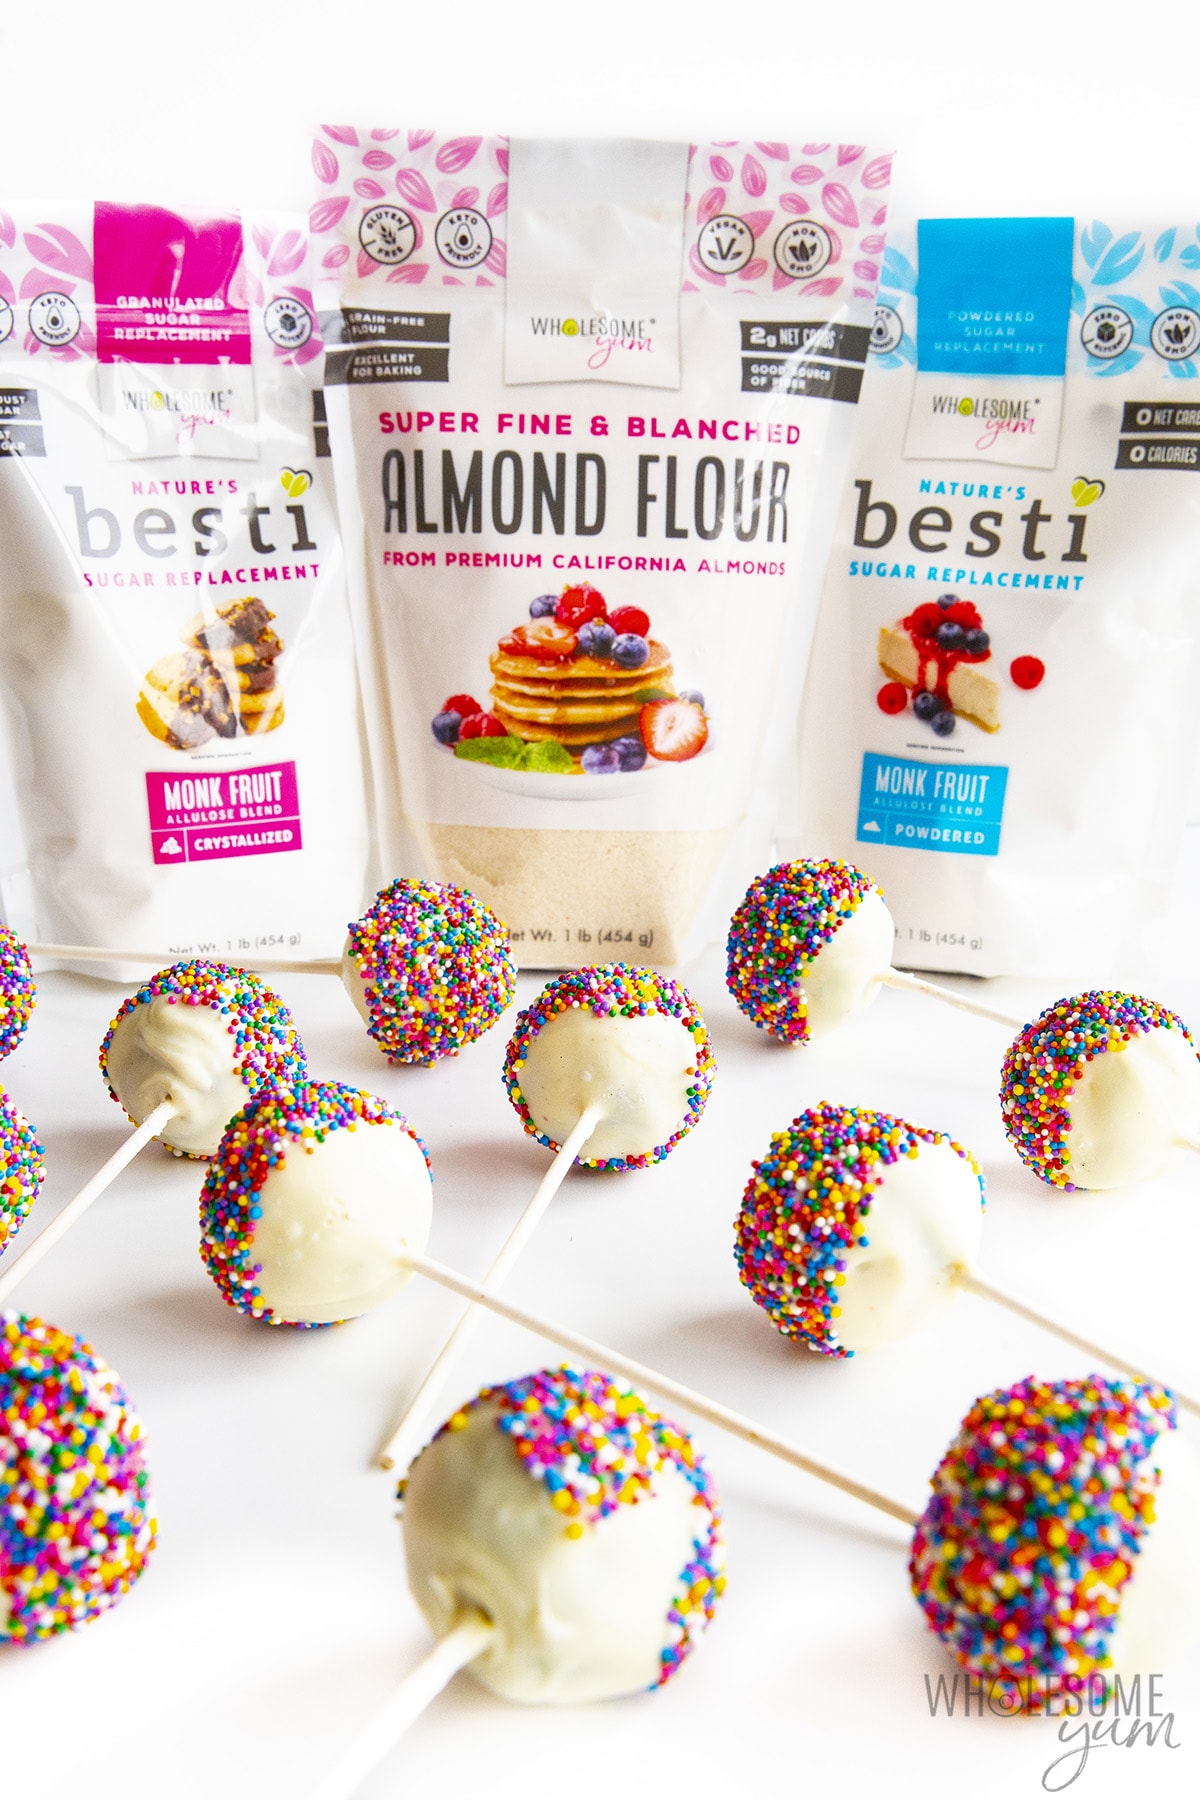 Keto cake pops with almond flour and Besti.